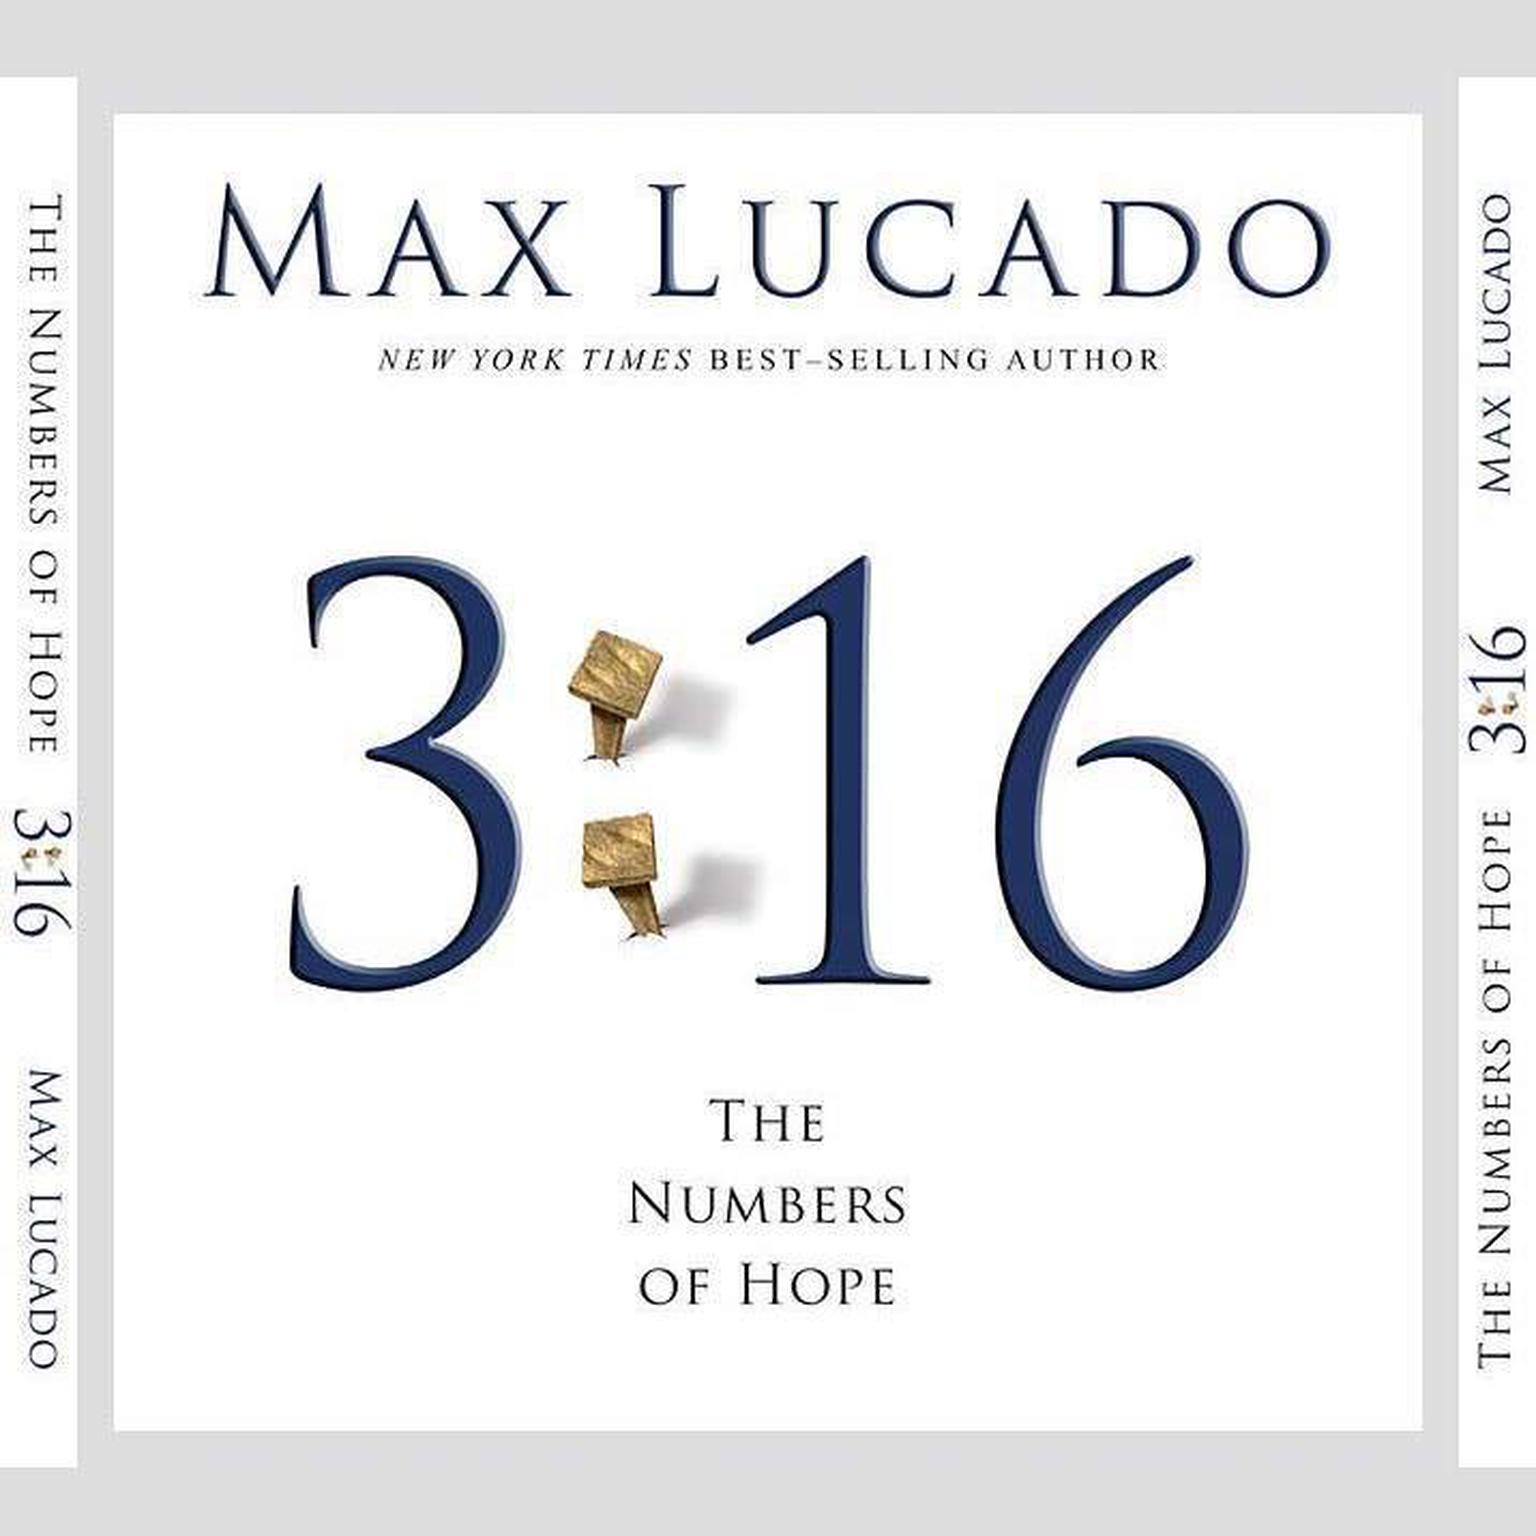 3:16 (Abridged): The Numbers of Hope Audiobook, by Max Lucado